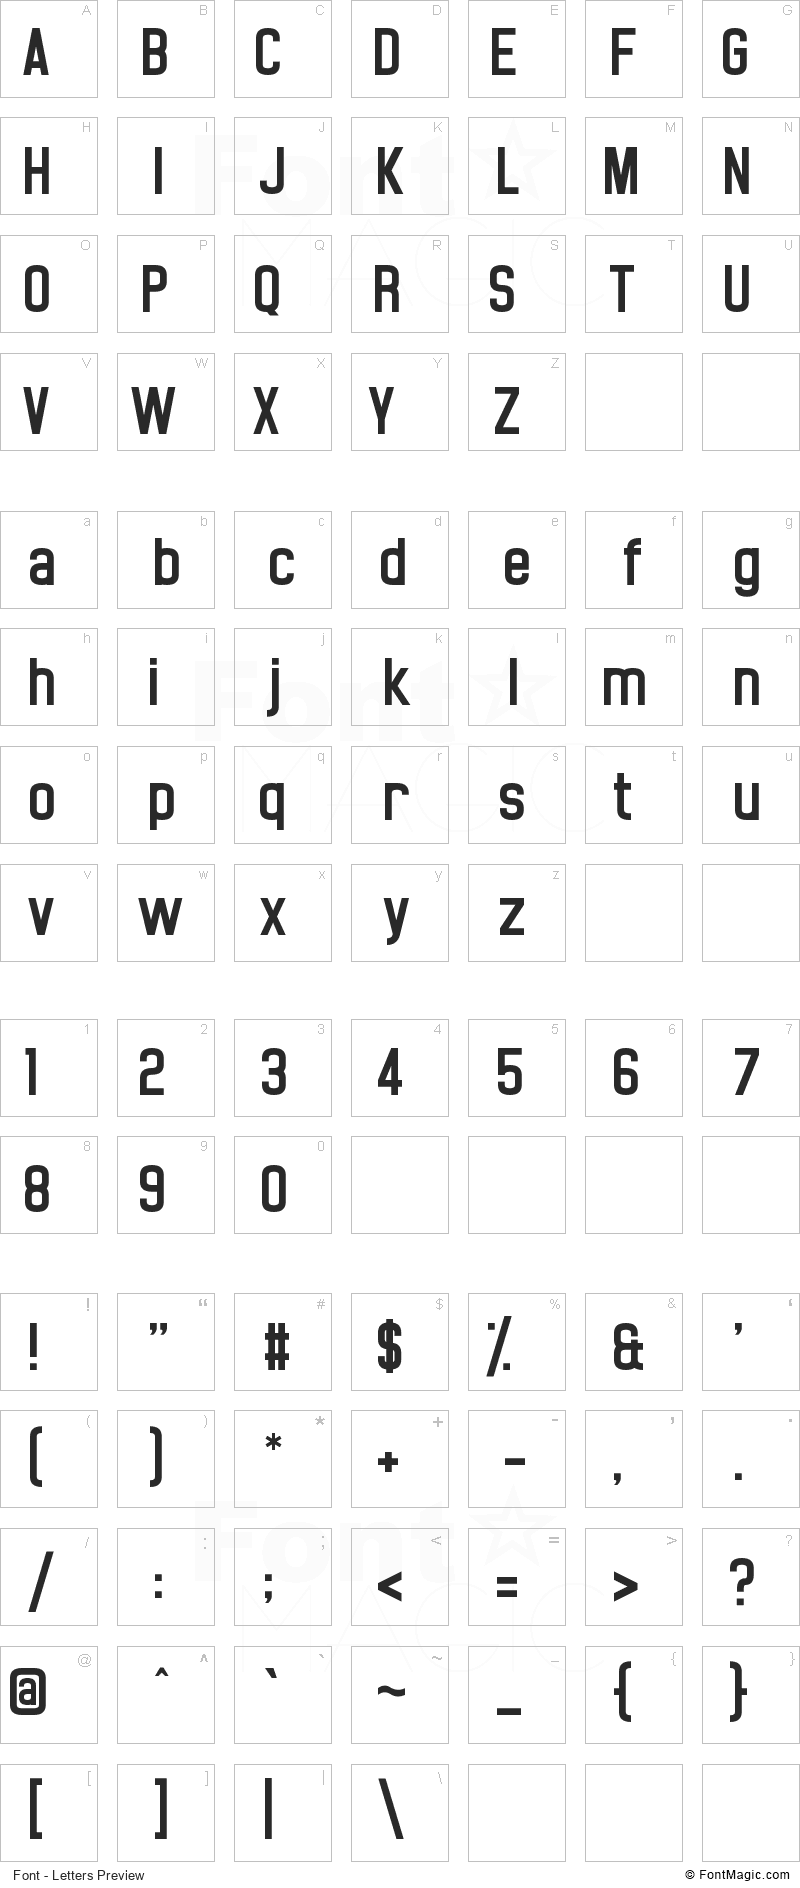 Noasarck Font - All Latters Preview Chart